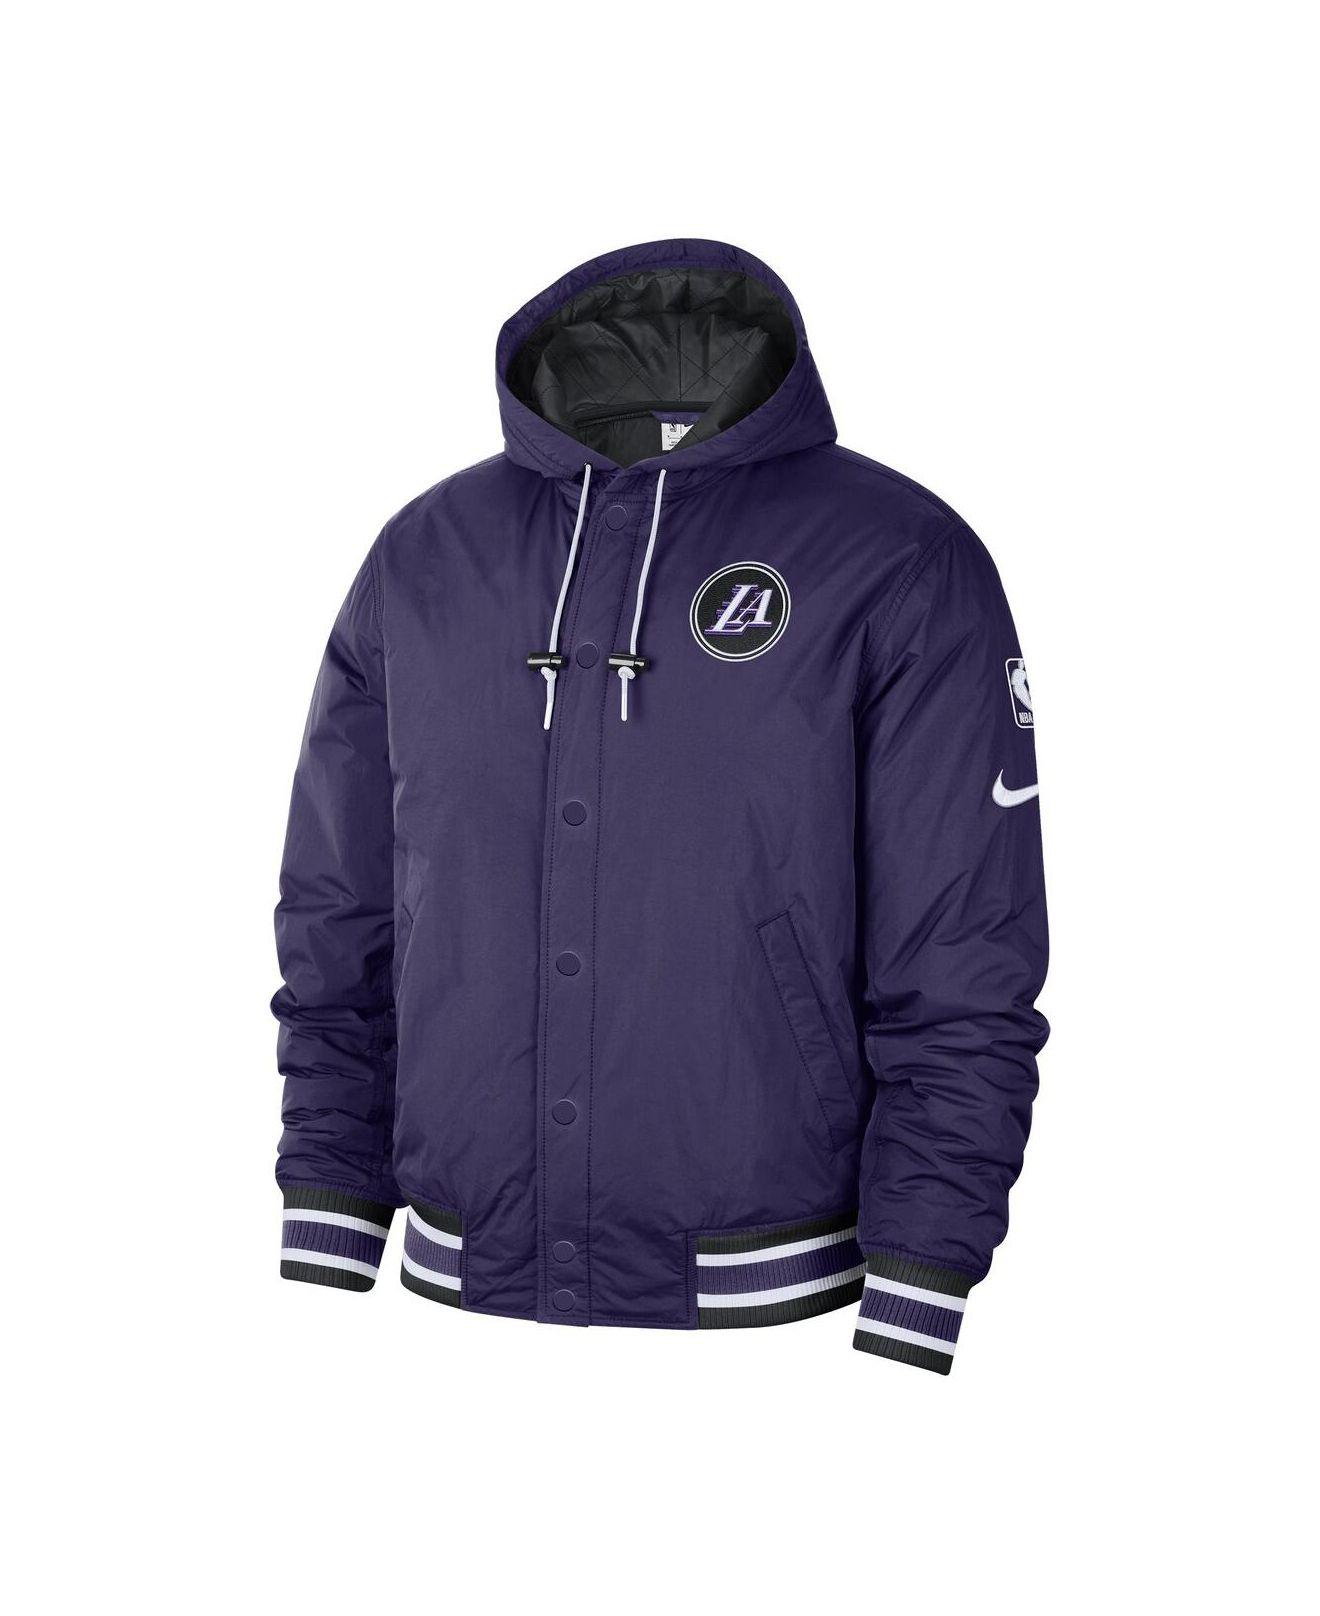 NIKE NBA LOS ANGELES LAKERS CITY EDITION COURTSIDE JACKET BLACK for £130.00